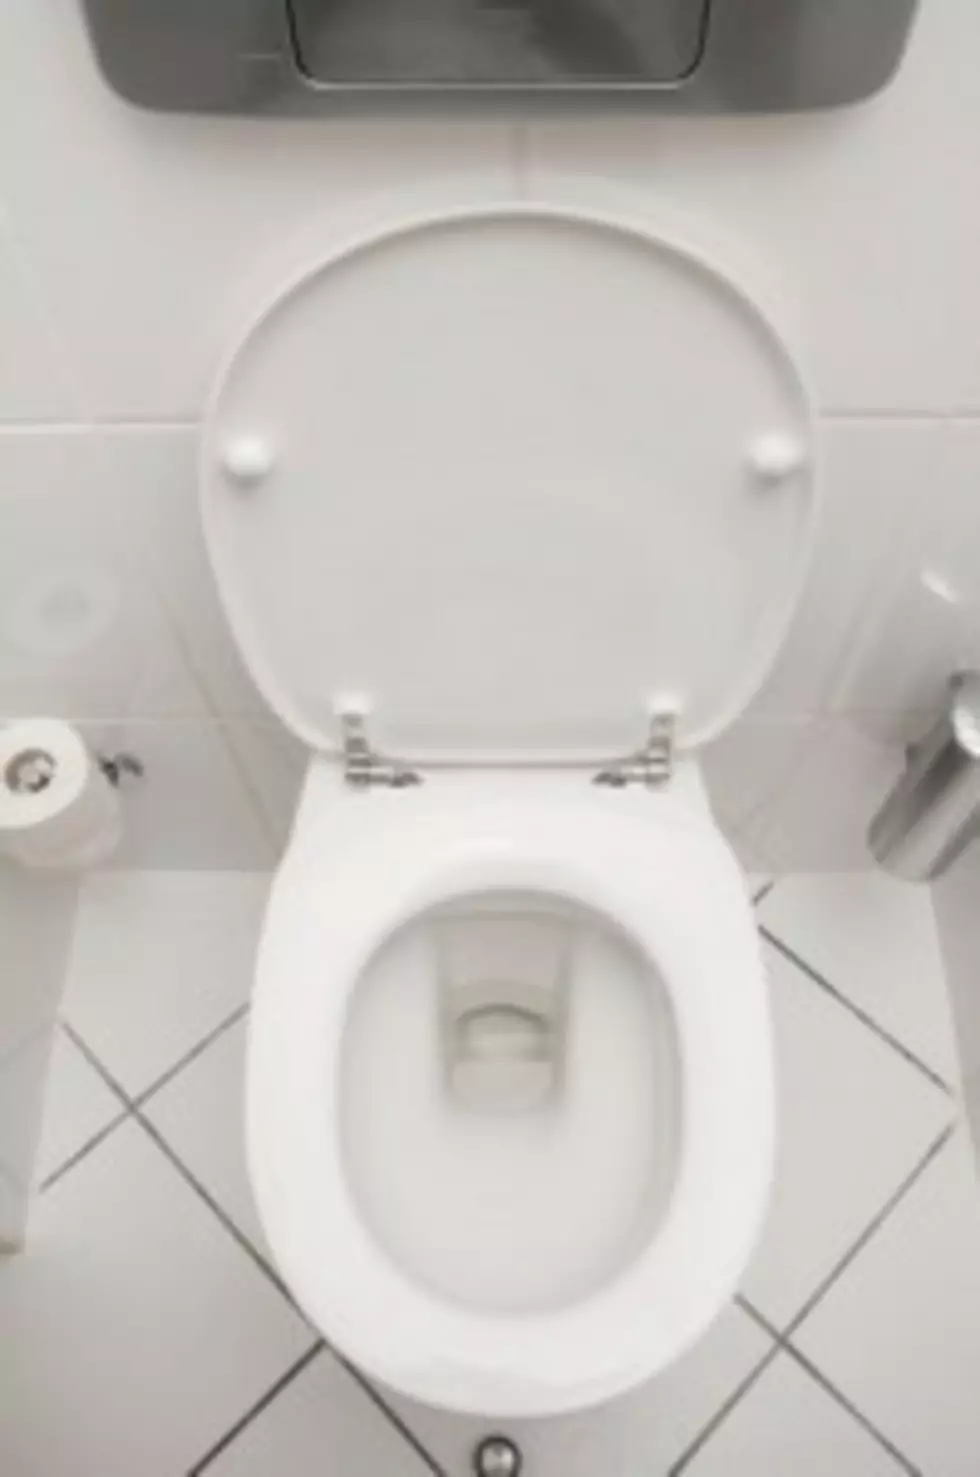 Attempted Bathroom Assault Turns into Creepy Fat Guy Stuck Under Stall &#8211; Global Oddities [AUDIO]